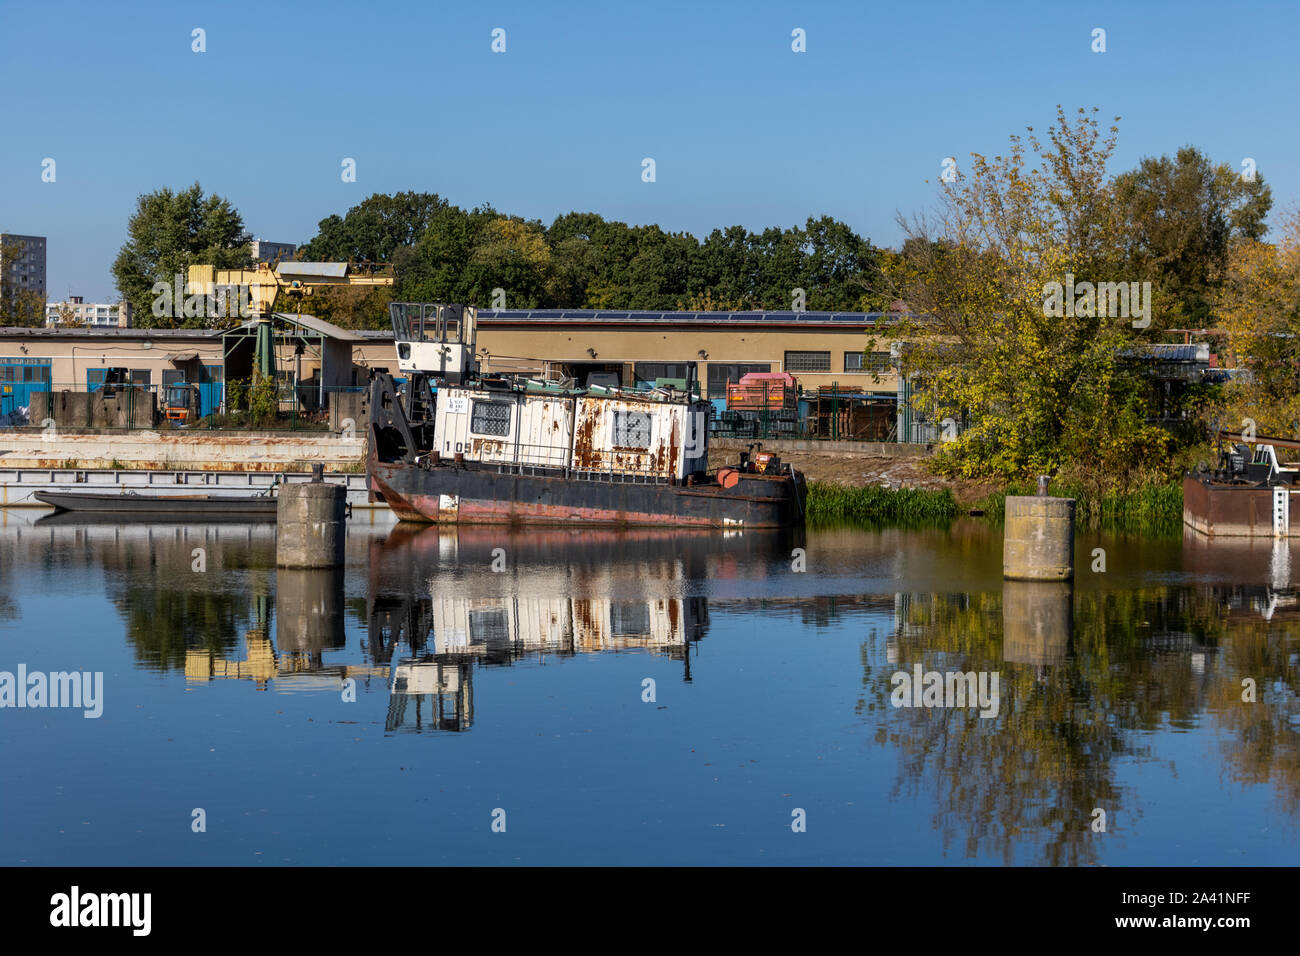 View of a rusty boat on the Elbe (Labe) river in Pardubice, Czech Republic. Stock Photo